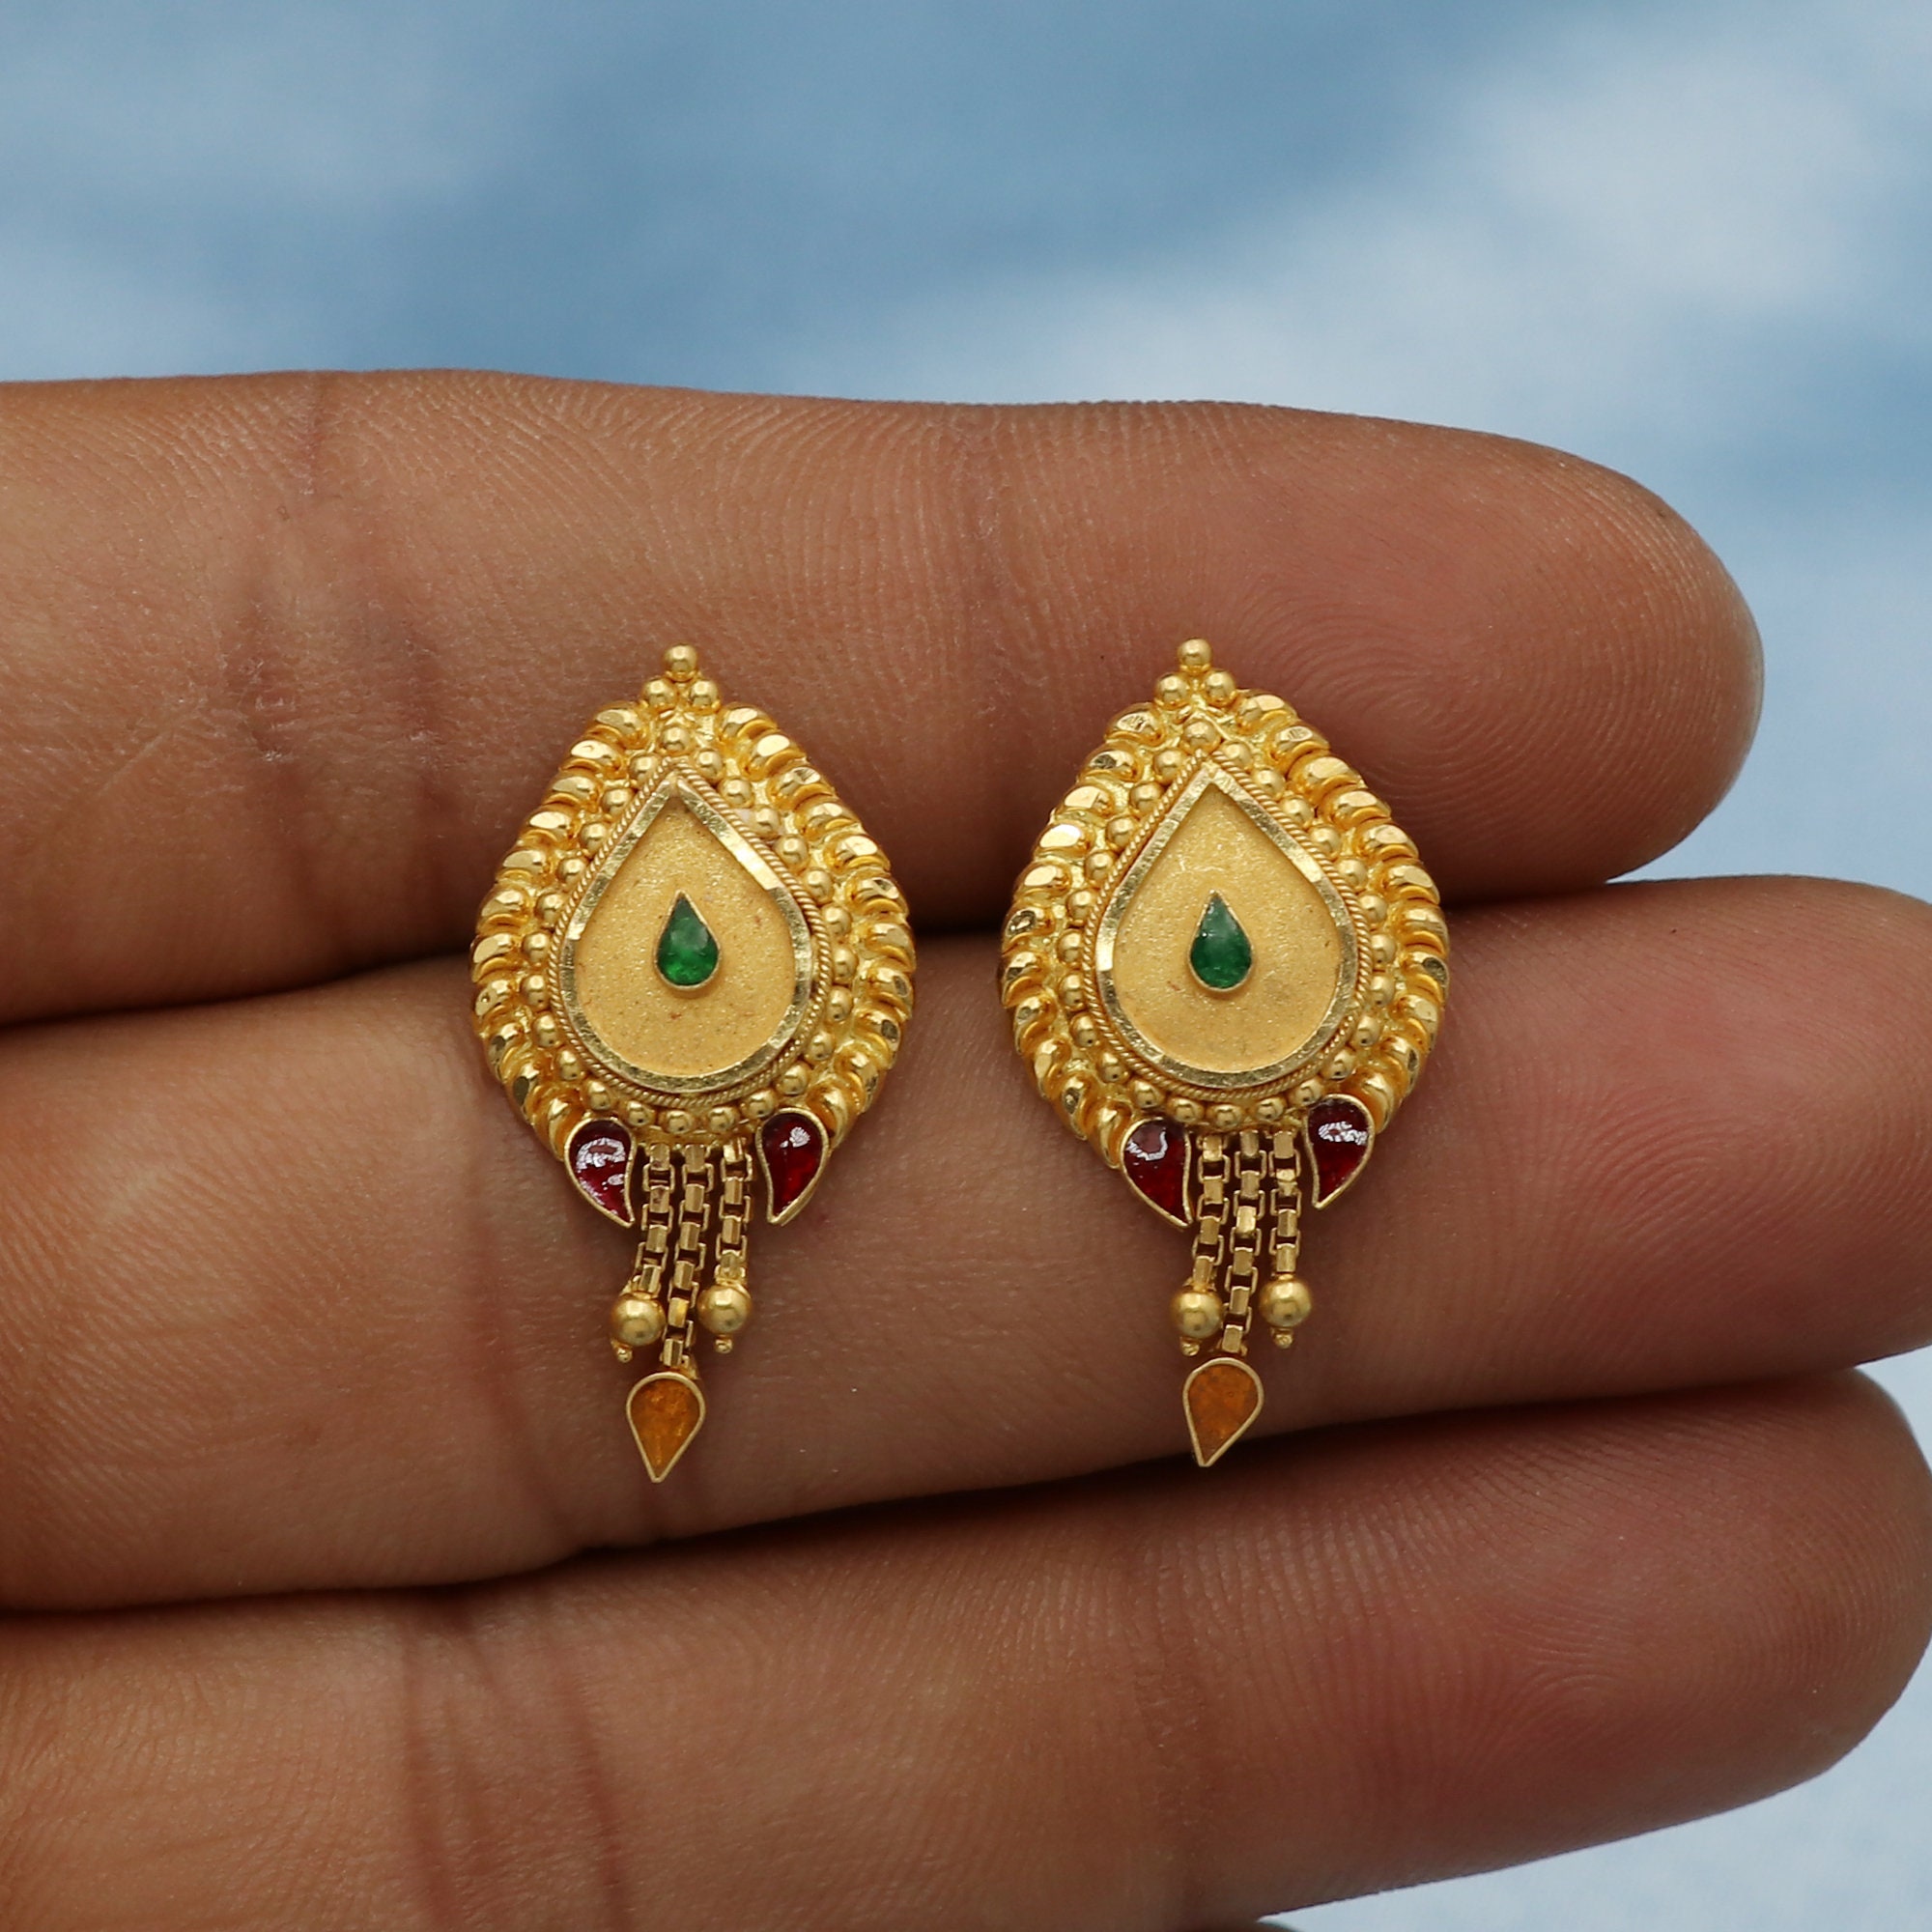 AZVA 22kt gold earrings with sculptural intricacies  Gold earrings designs  Bridal gold jewellery designs Gold bridal earrings